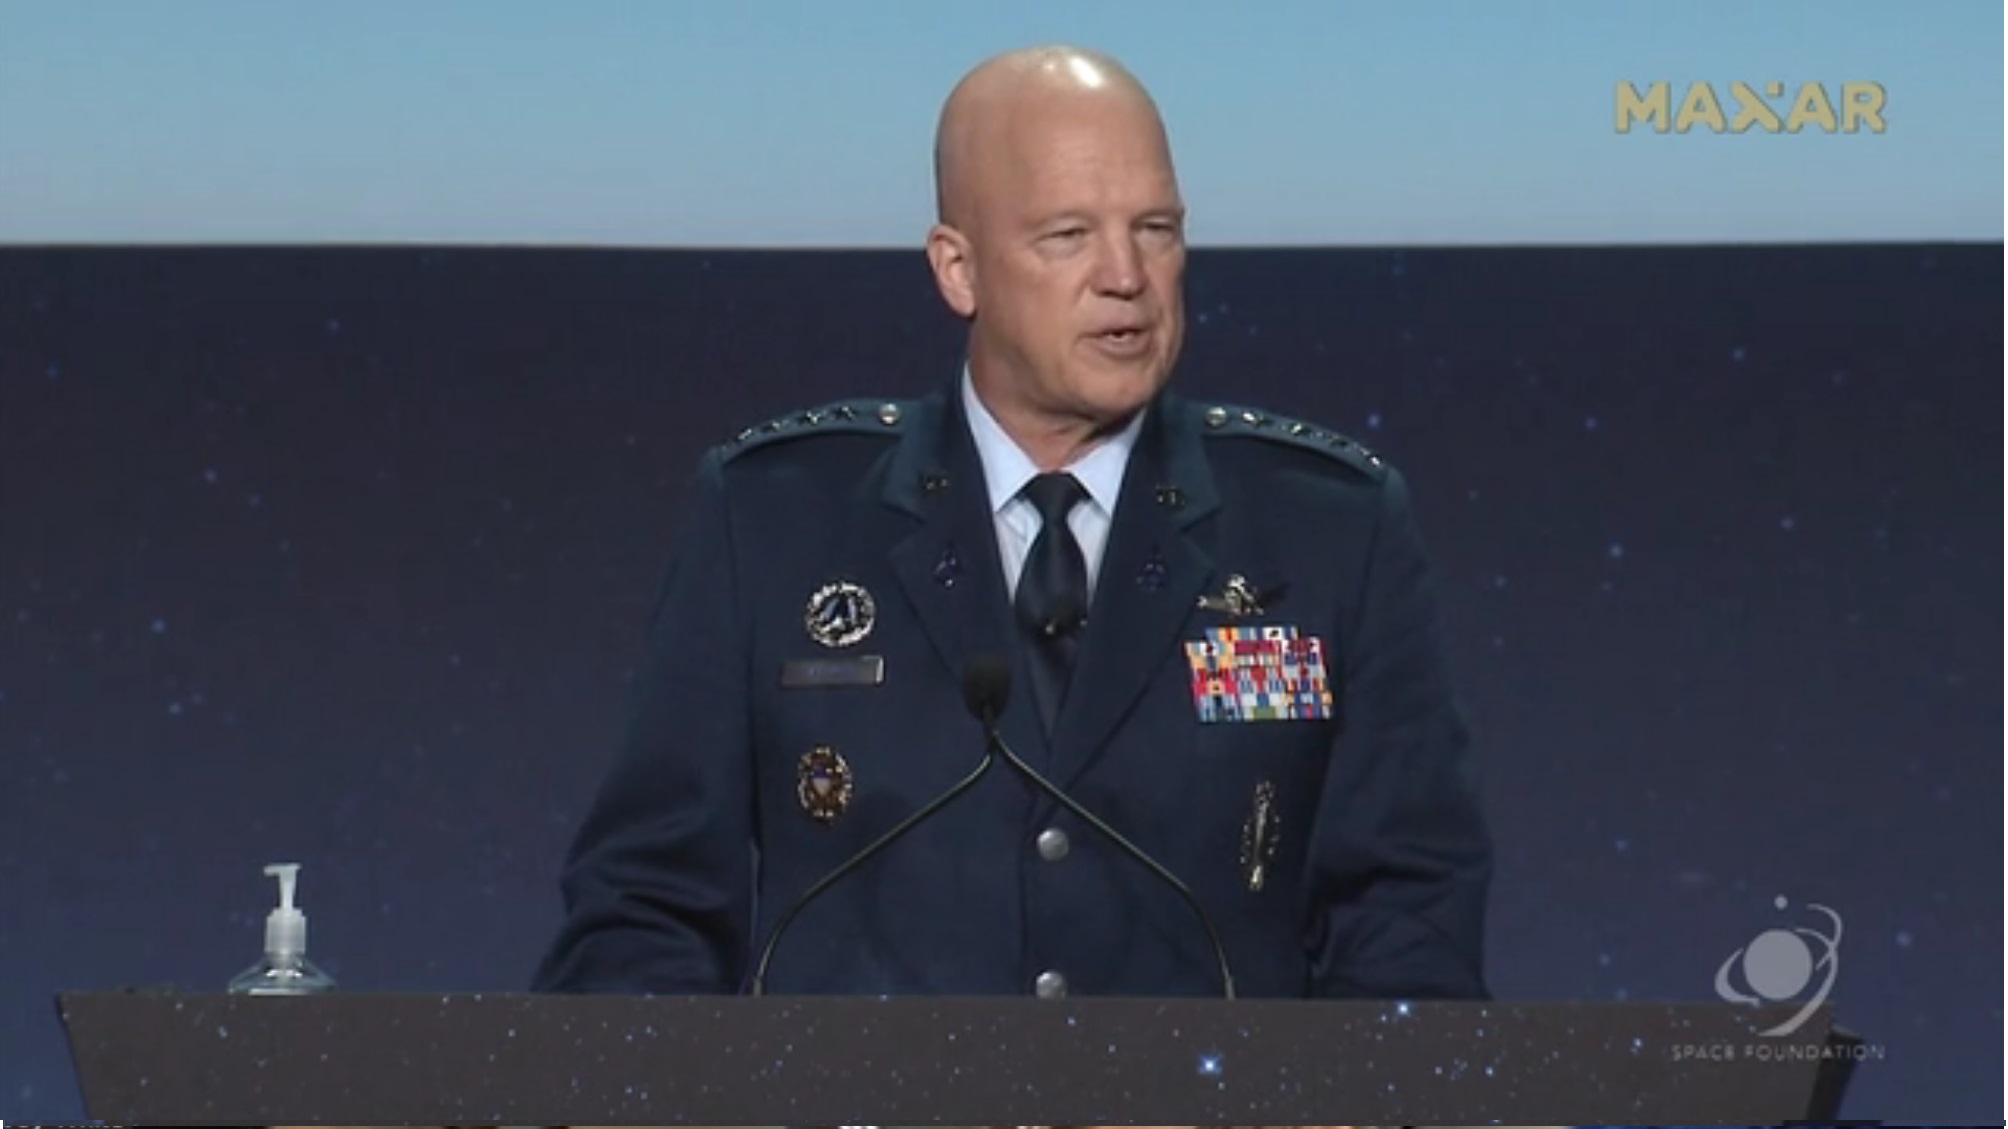 Gen. Jay Raymond, Chief of Space Operations and the Space Force's top general, said speed and agility will ensure the future of his service. Raymond's successor, Gen. Chance Saltzman will address the 2023 Space Symposium.